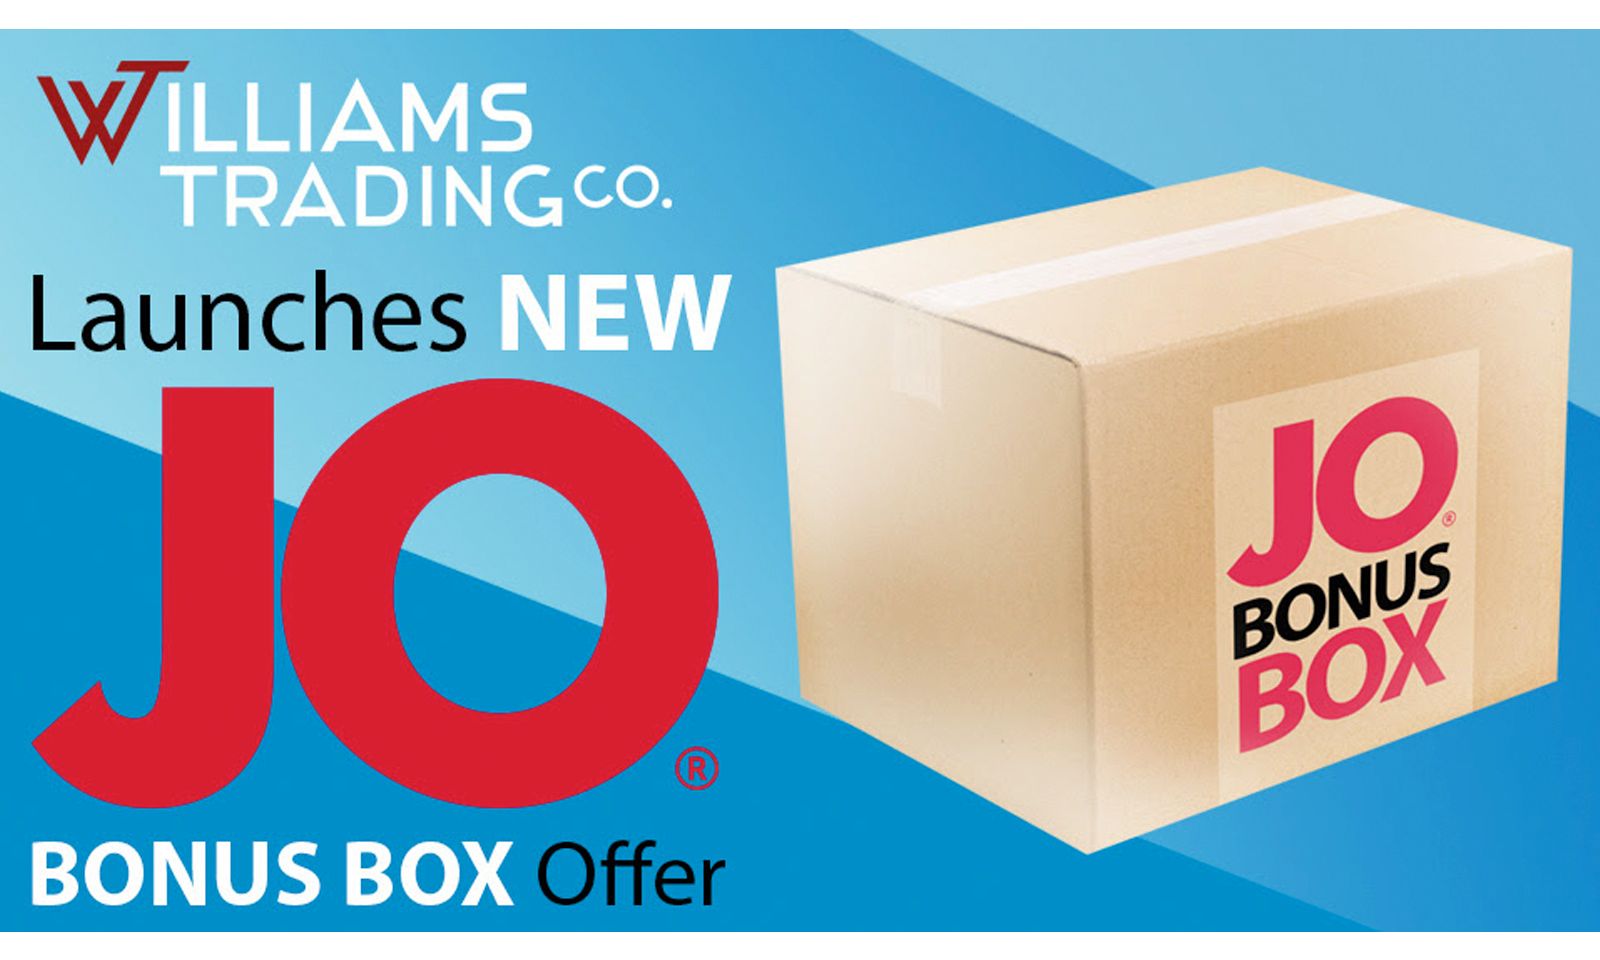 System JO Bonus Box Offer Available From Williams Trading